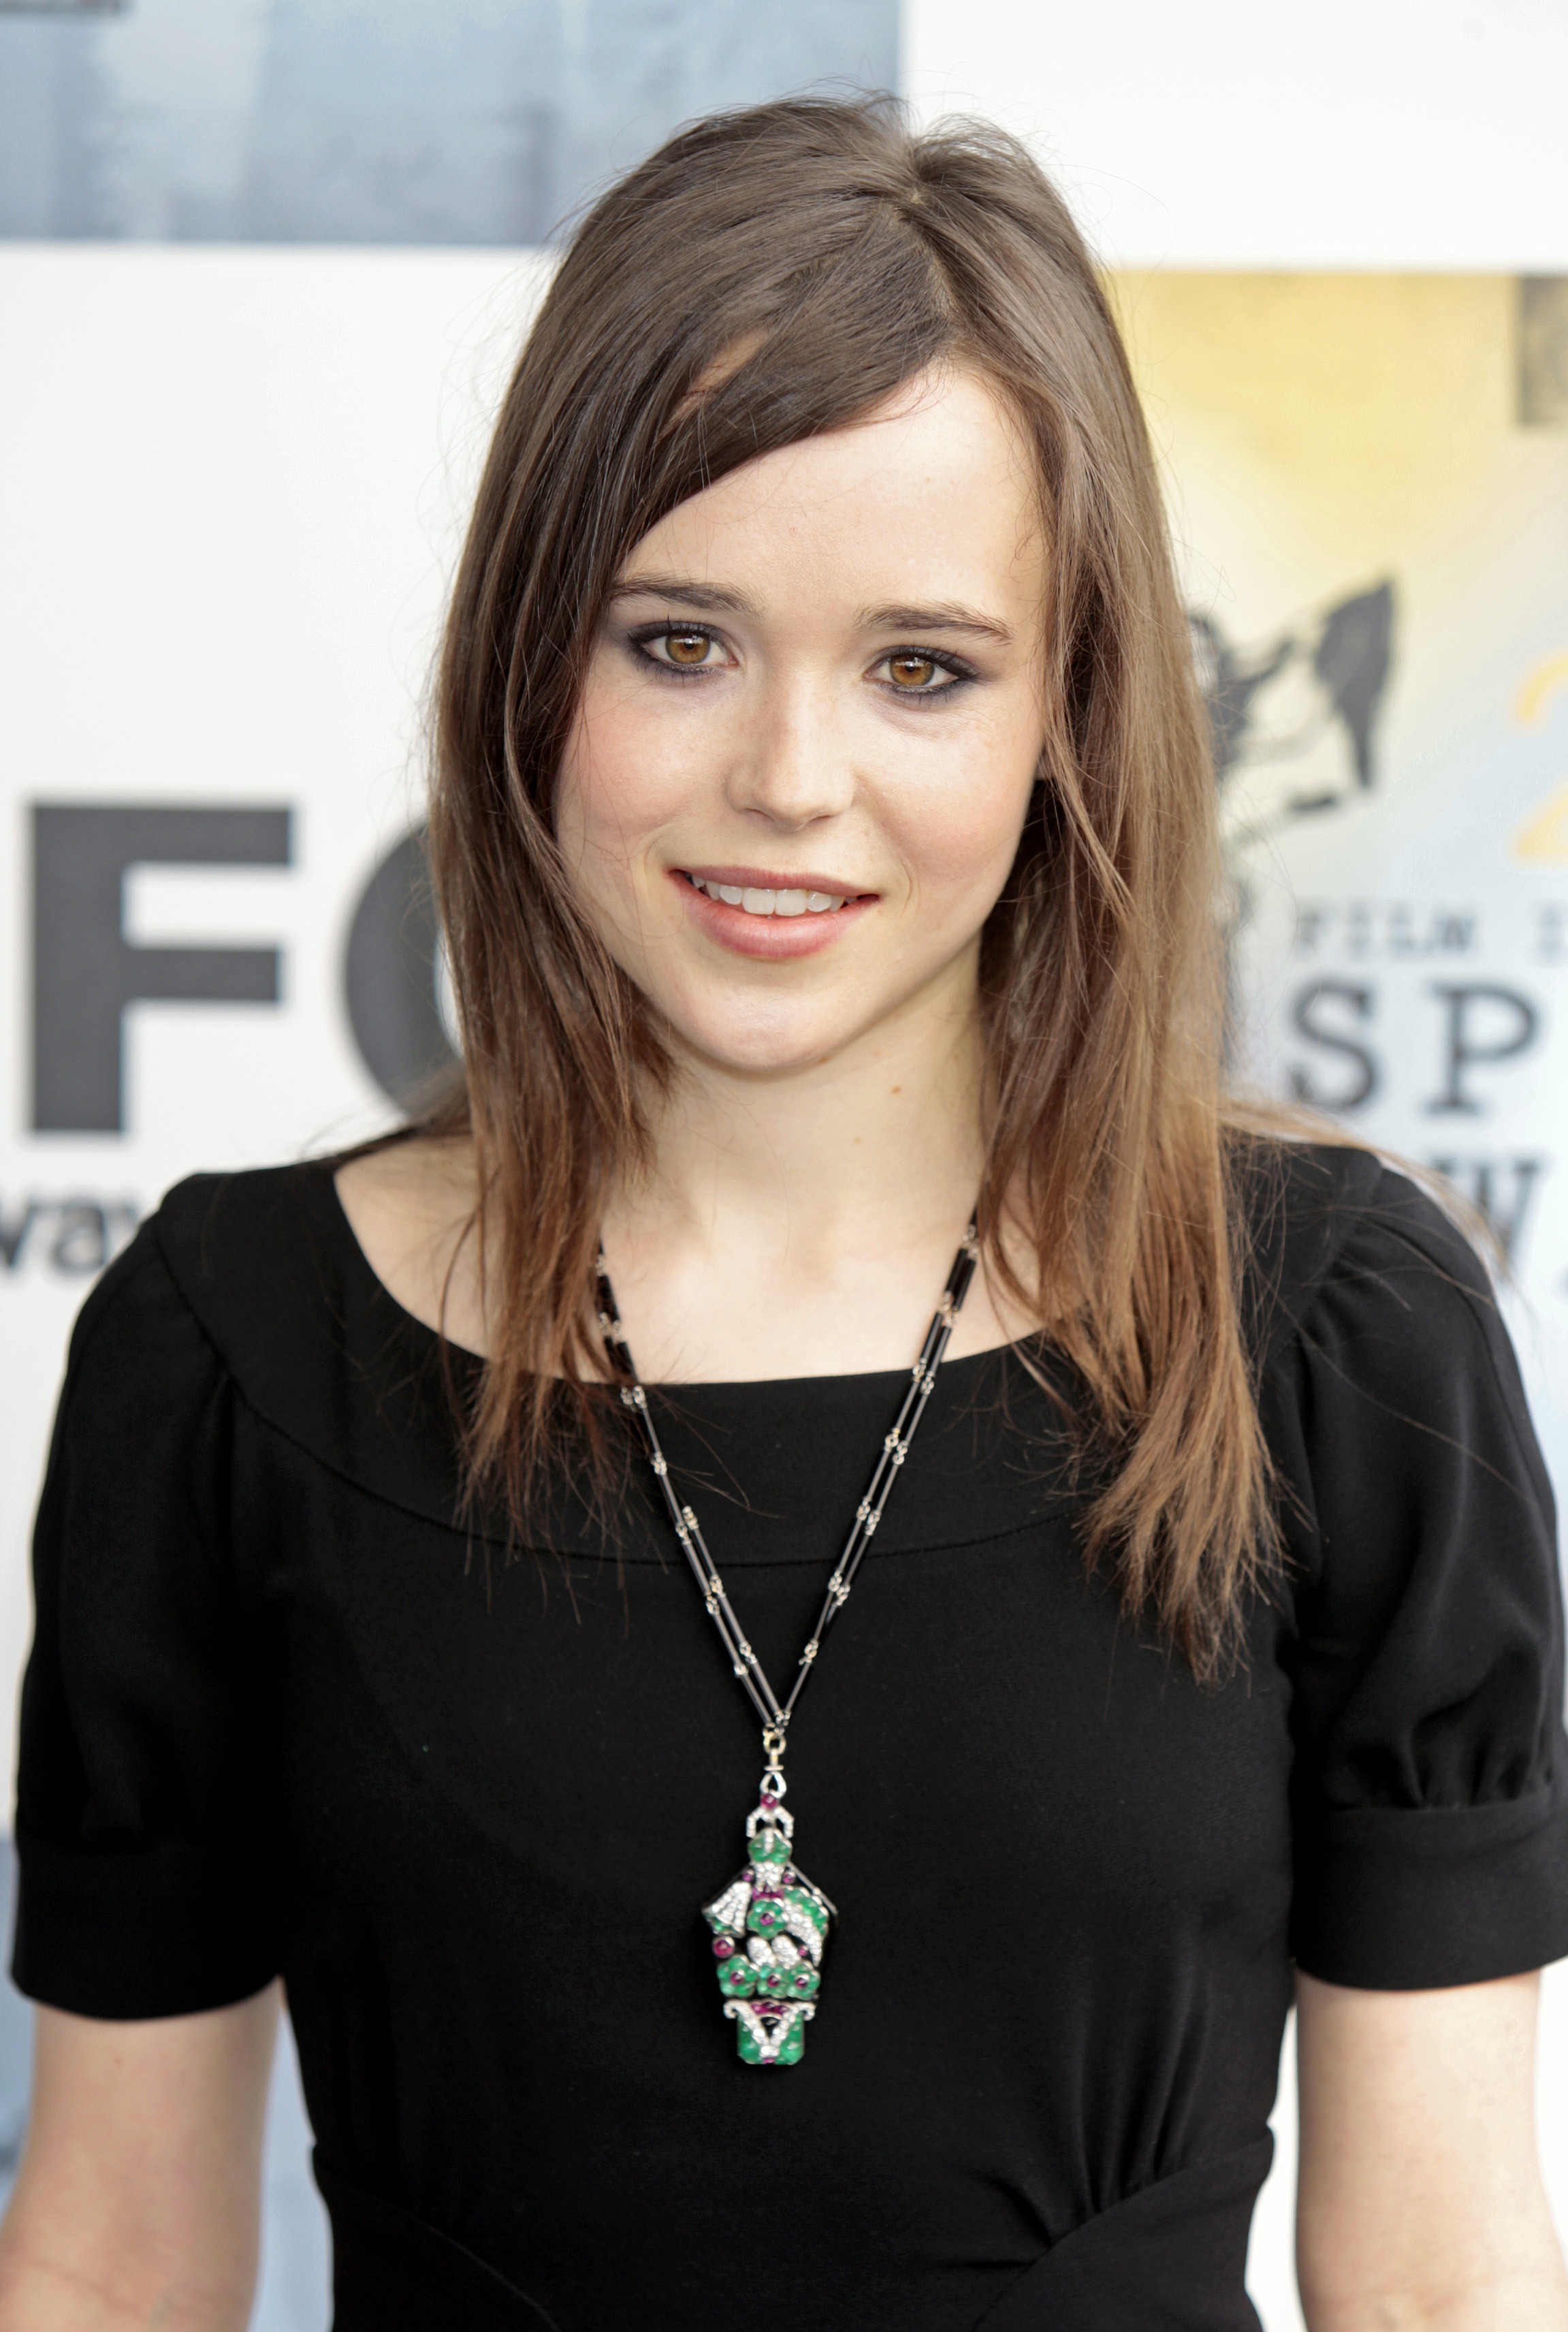 ellen-page-2021-from-ellen-page-to-elliot-page-the-story-of-a-tra